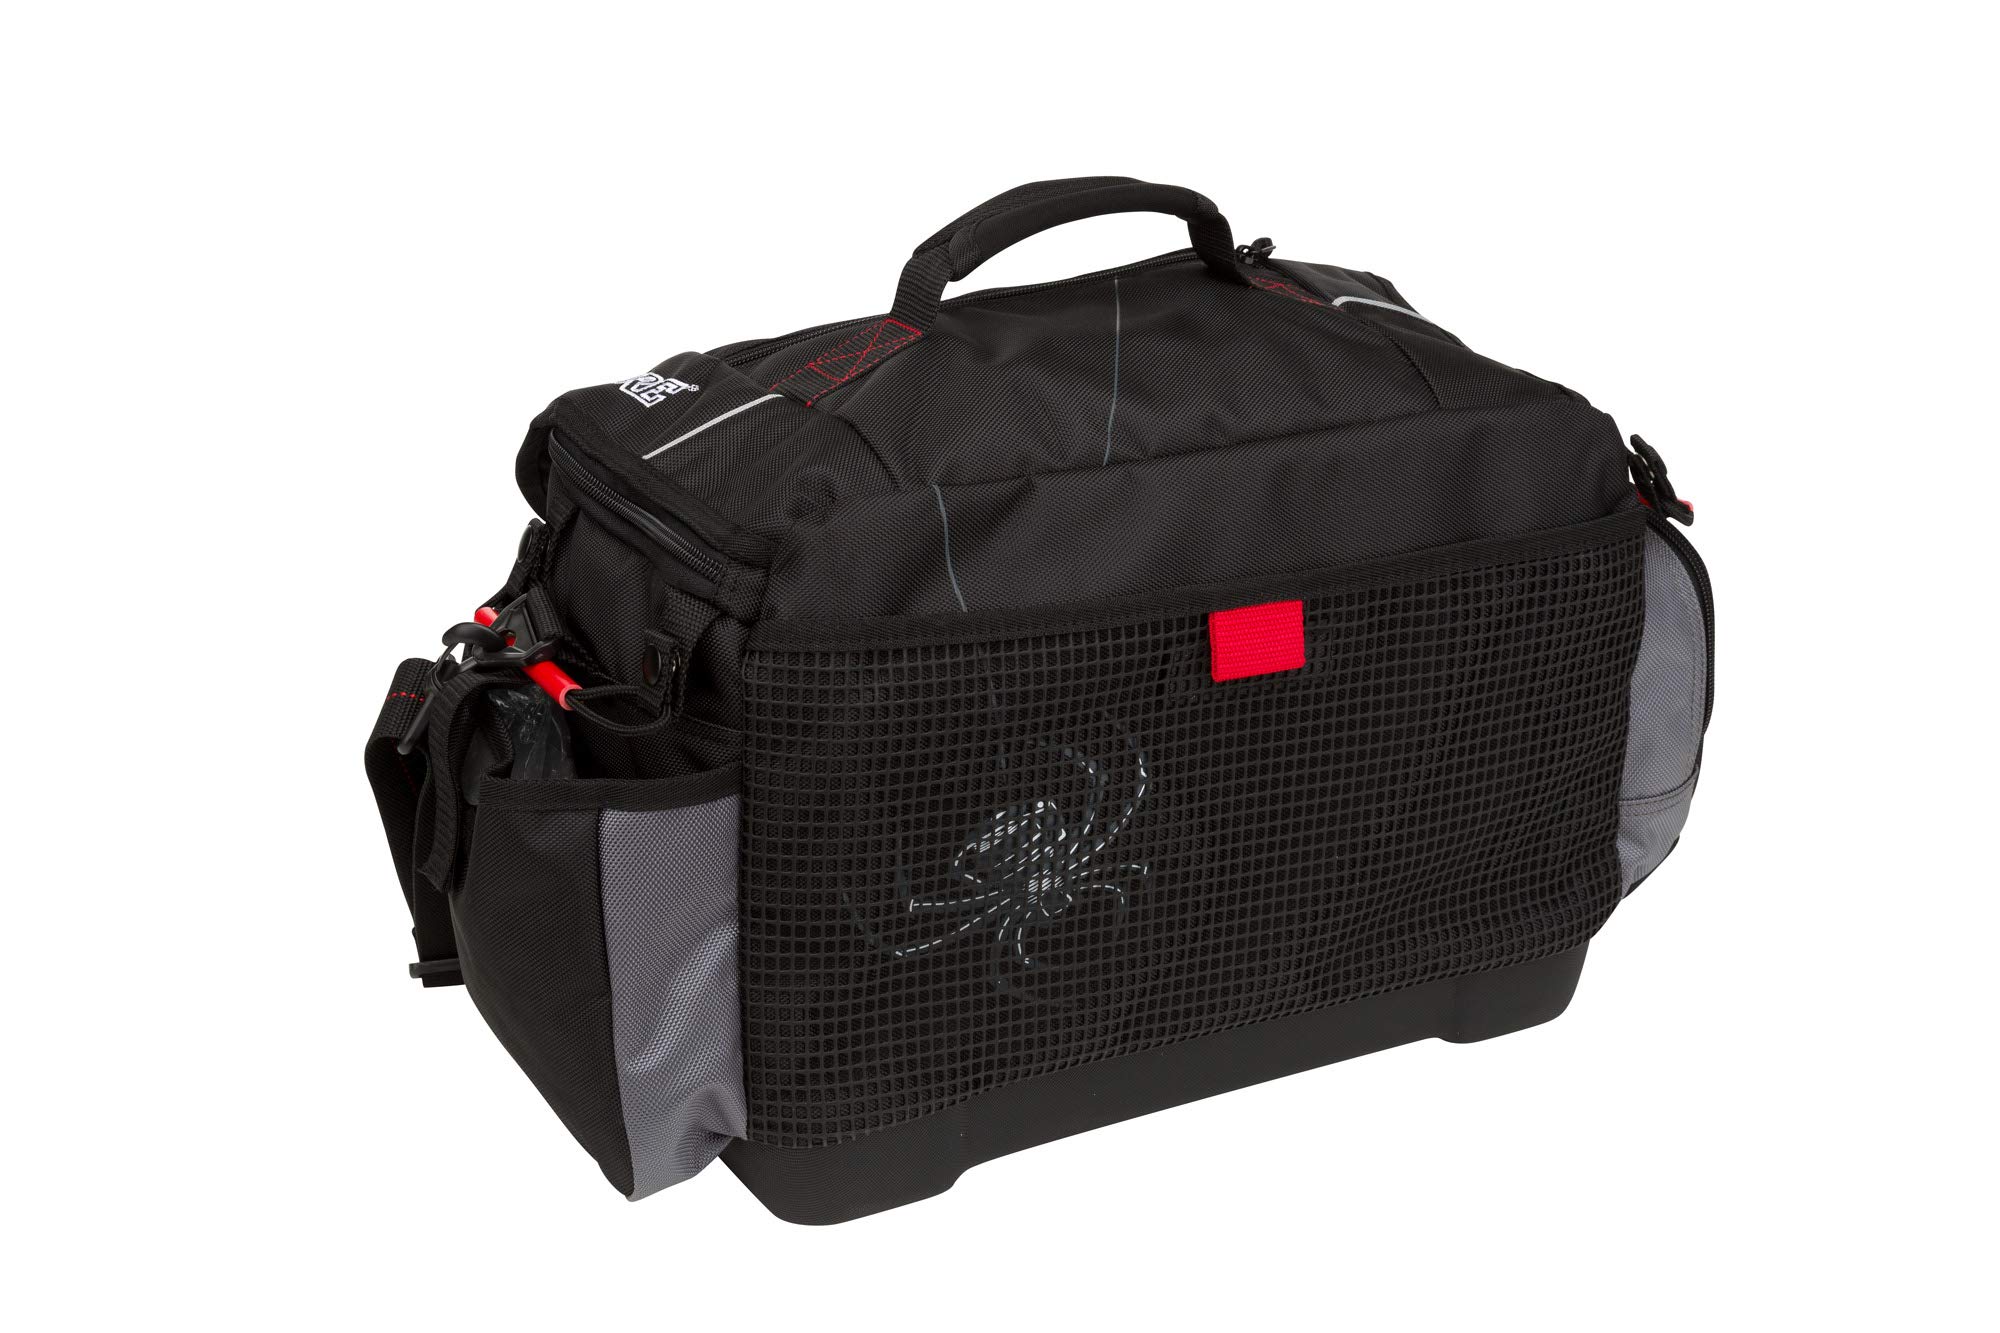 Spiderwire Wolf Tackle Bag, 38.8-Liter - image 4 of 9